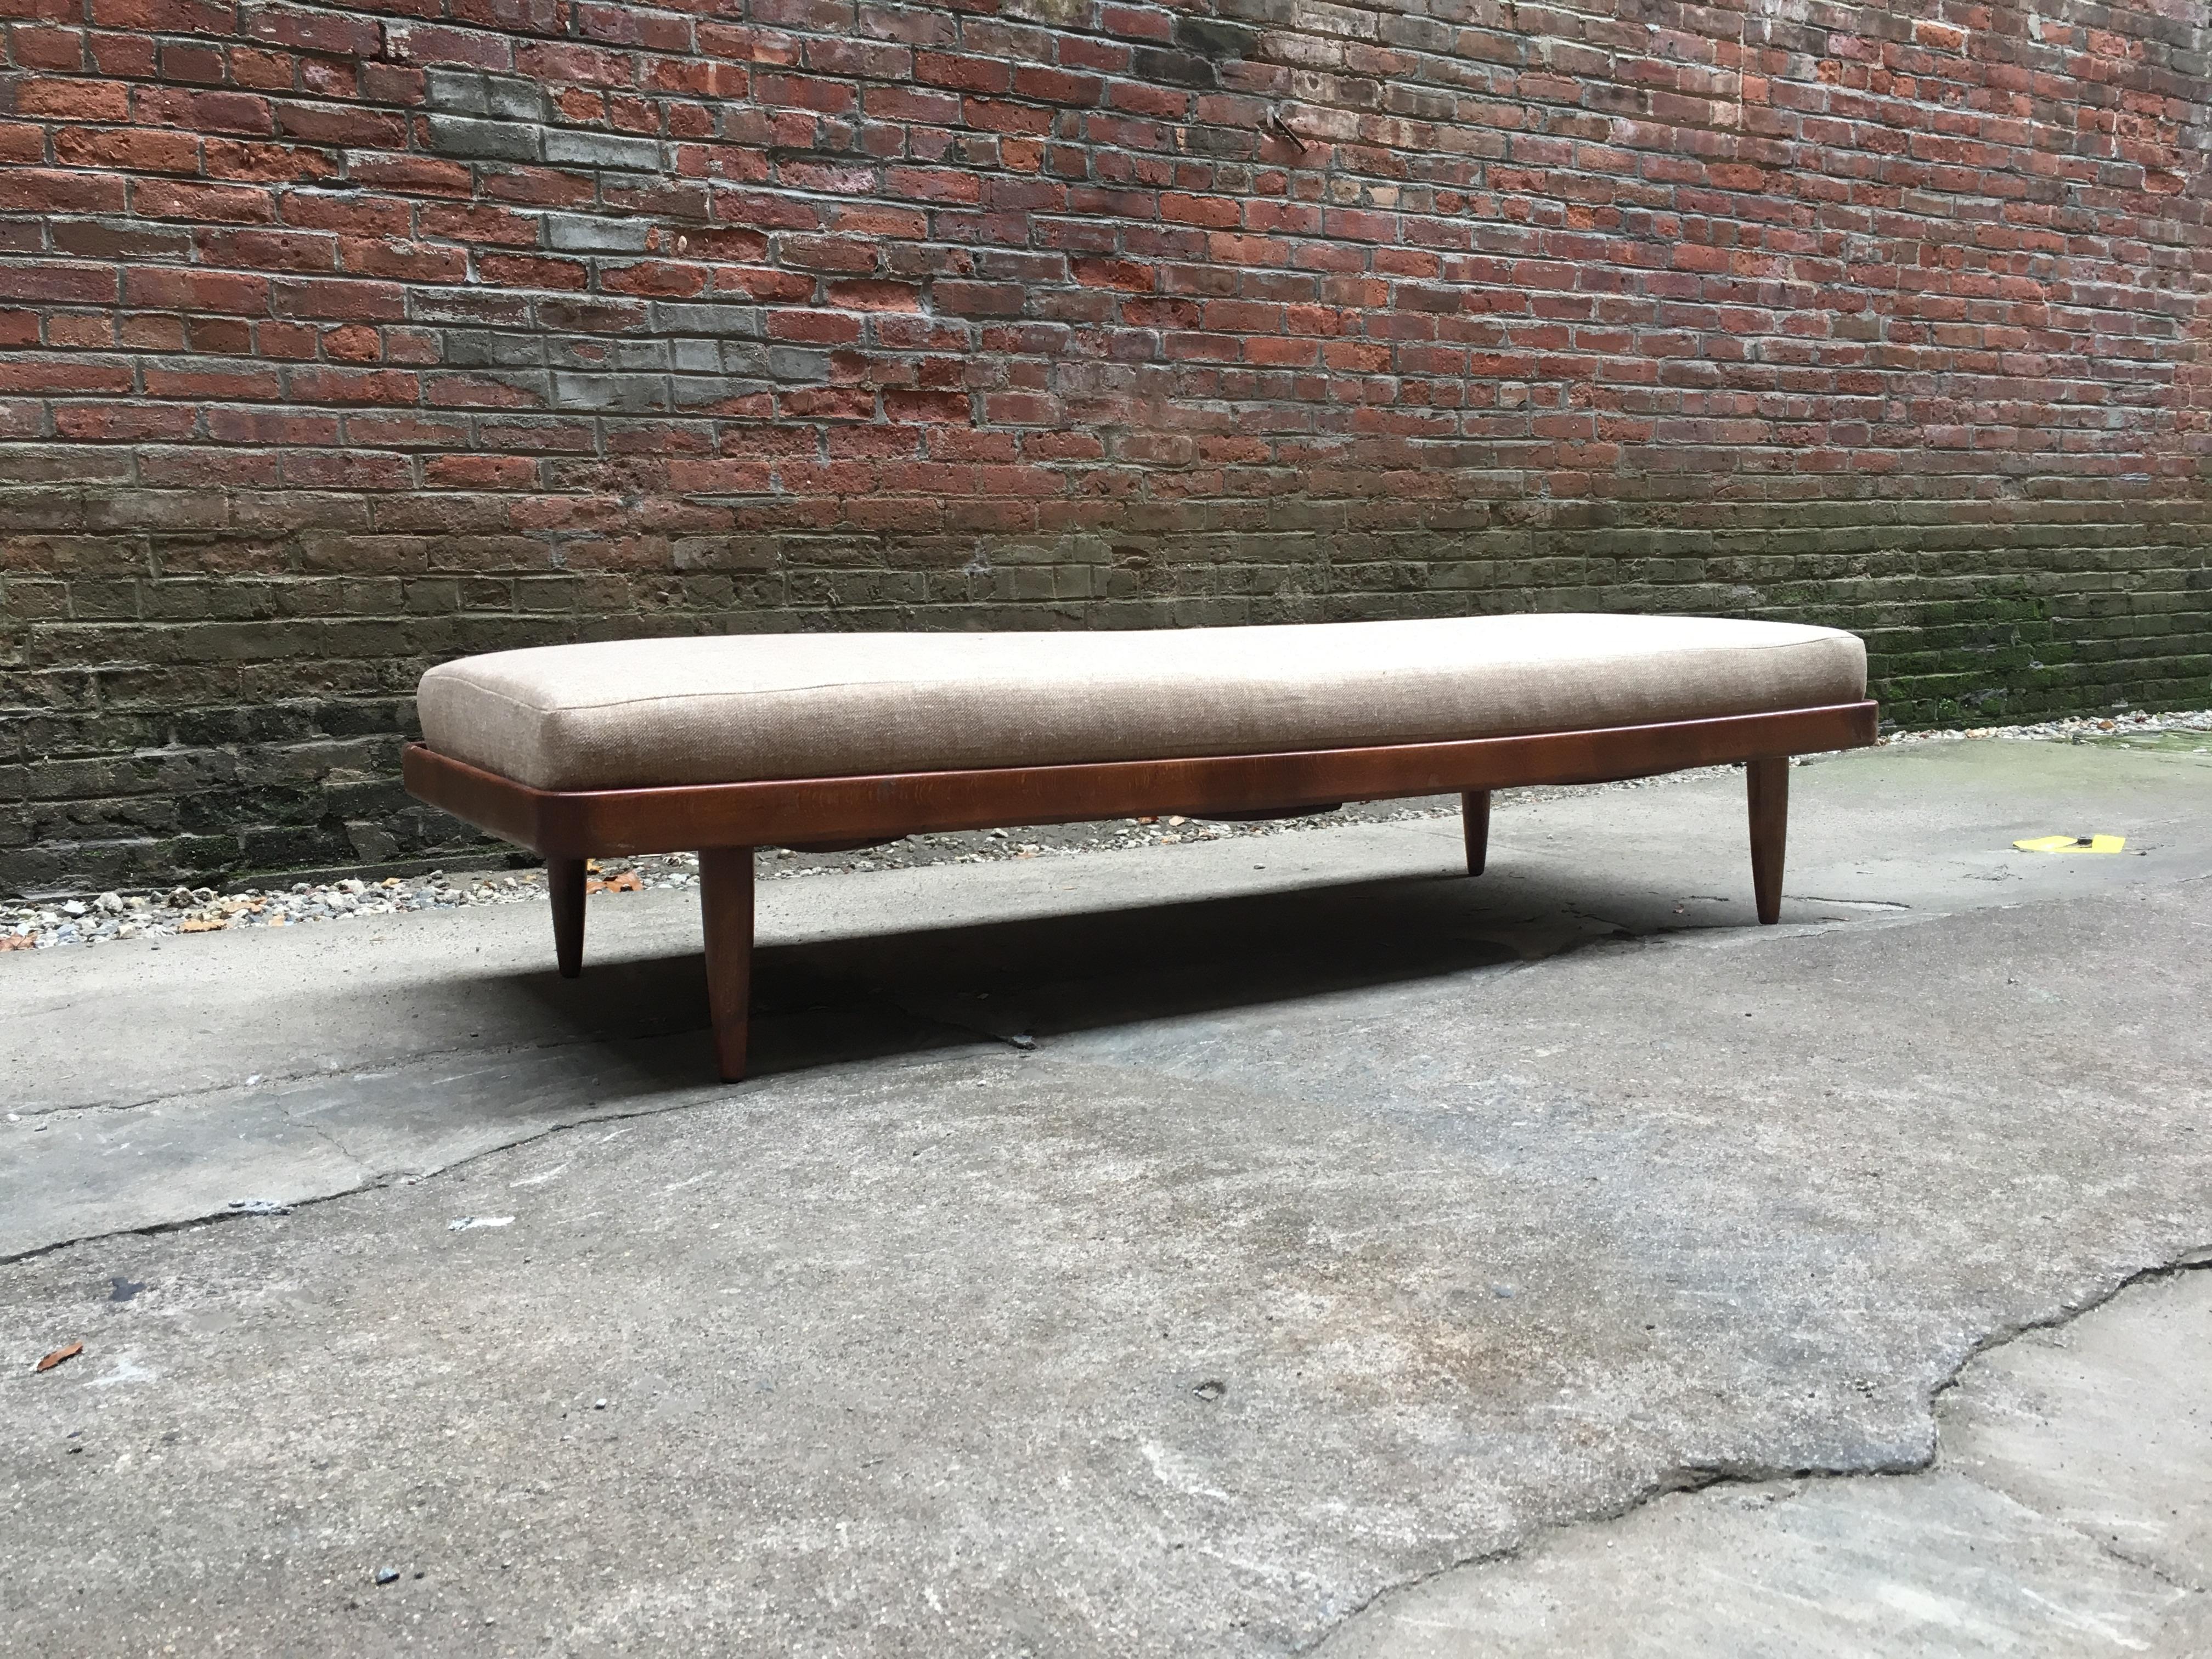 Understated Yugoslavian 1960s design. The bench can go anywhere in the home. Featuring rounded corners, tapered legs and a wonderful 